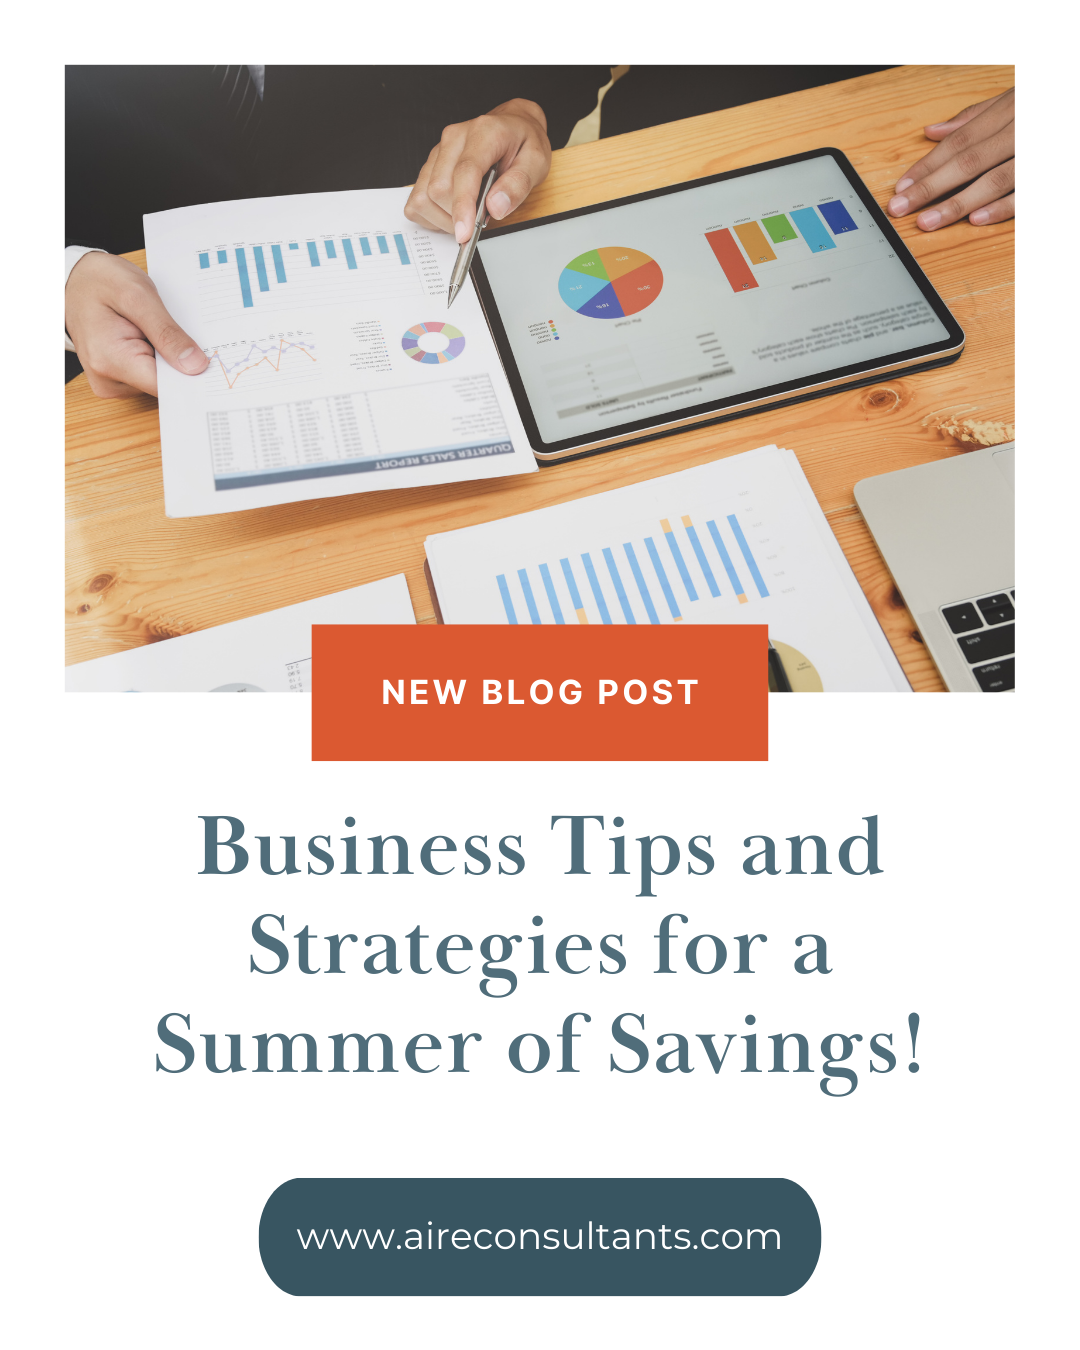 Business tips and strategies for a summer of savings